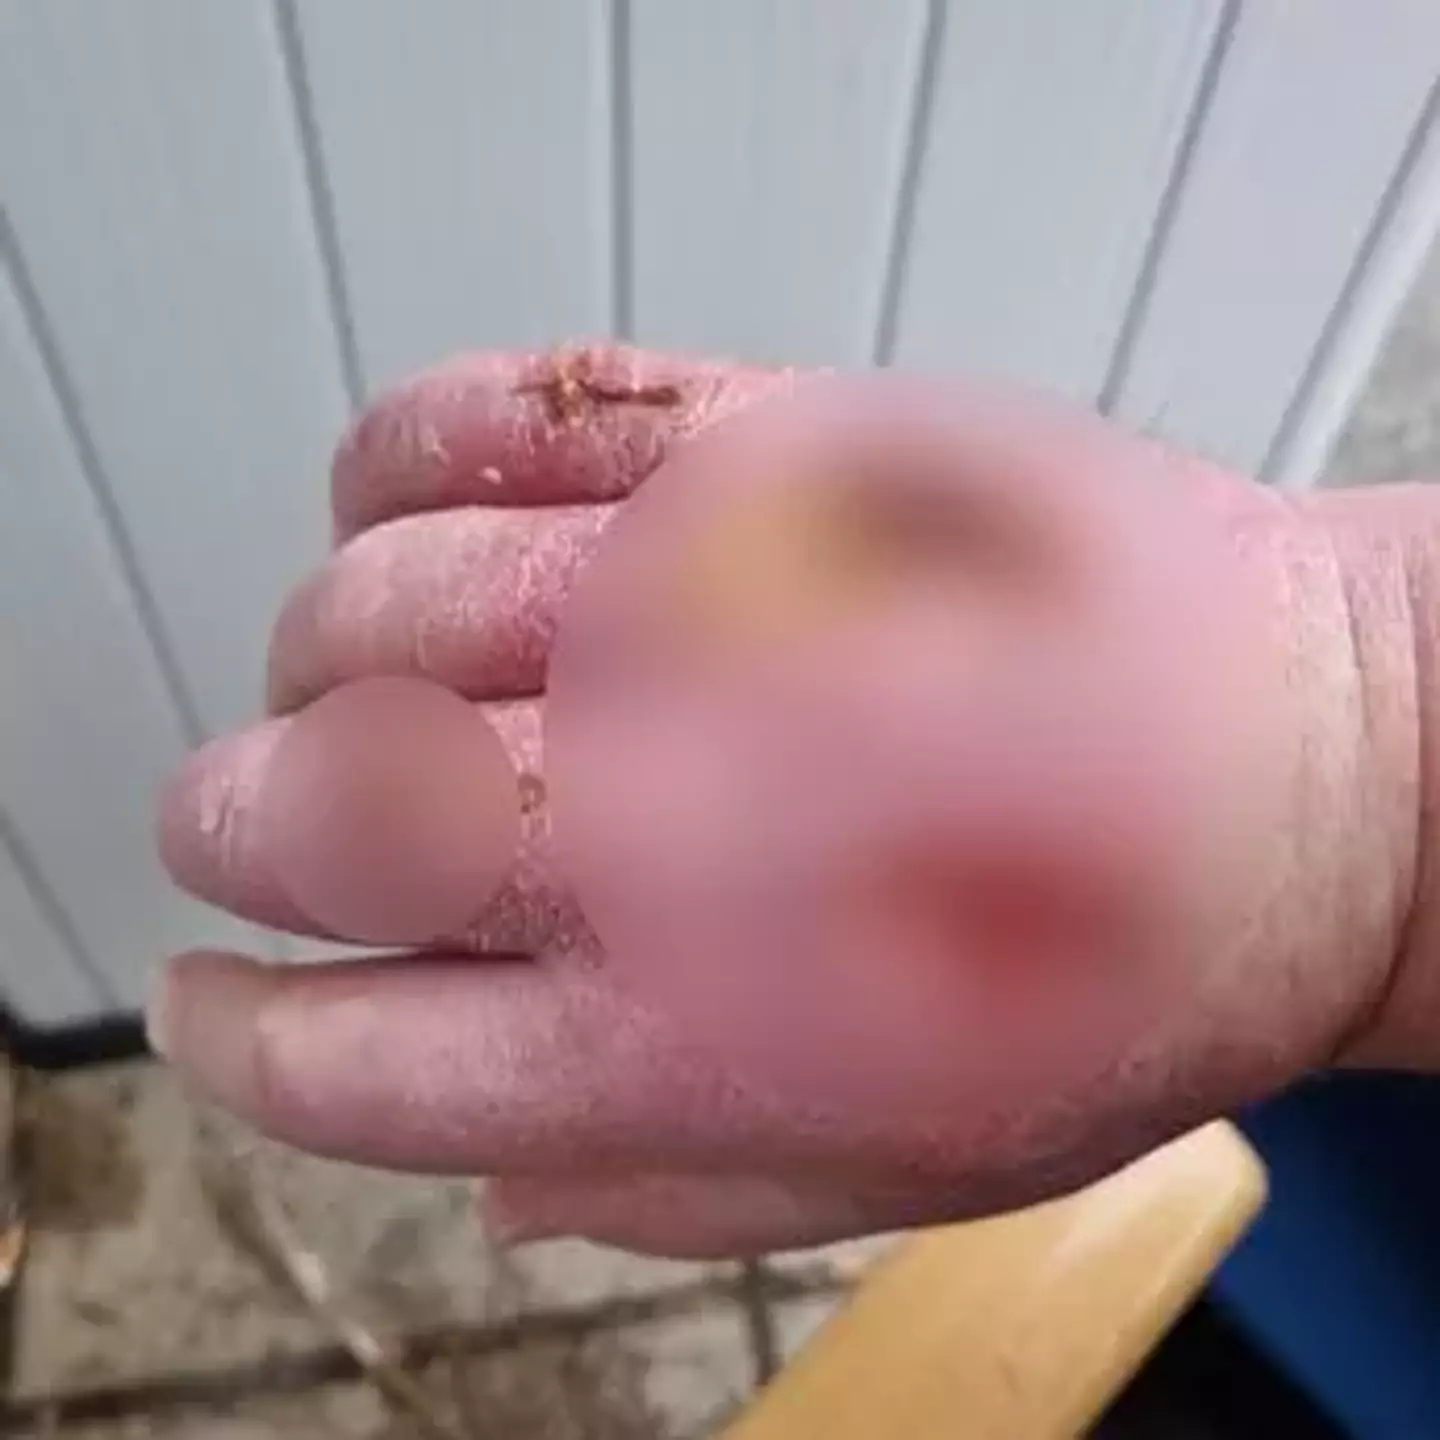 Doctors considered amputating his arm.